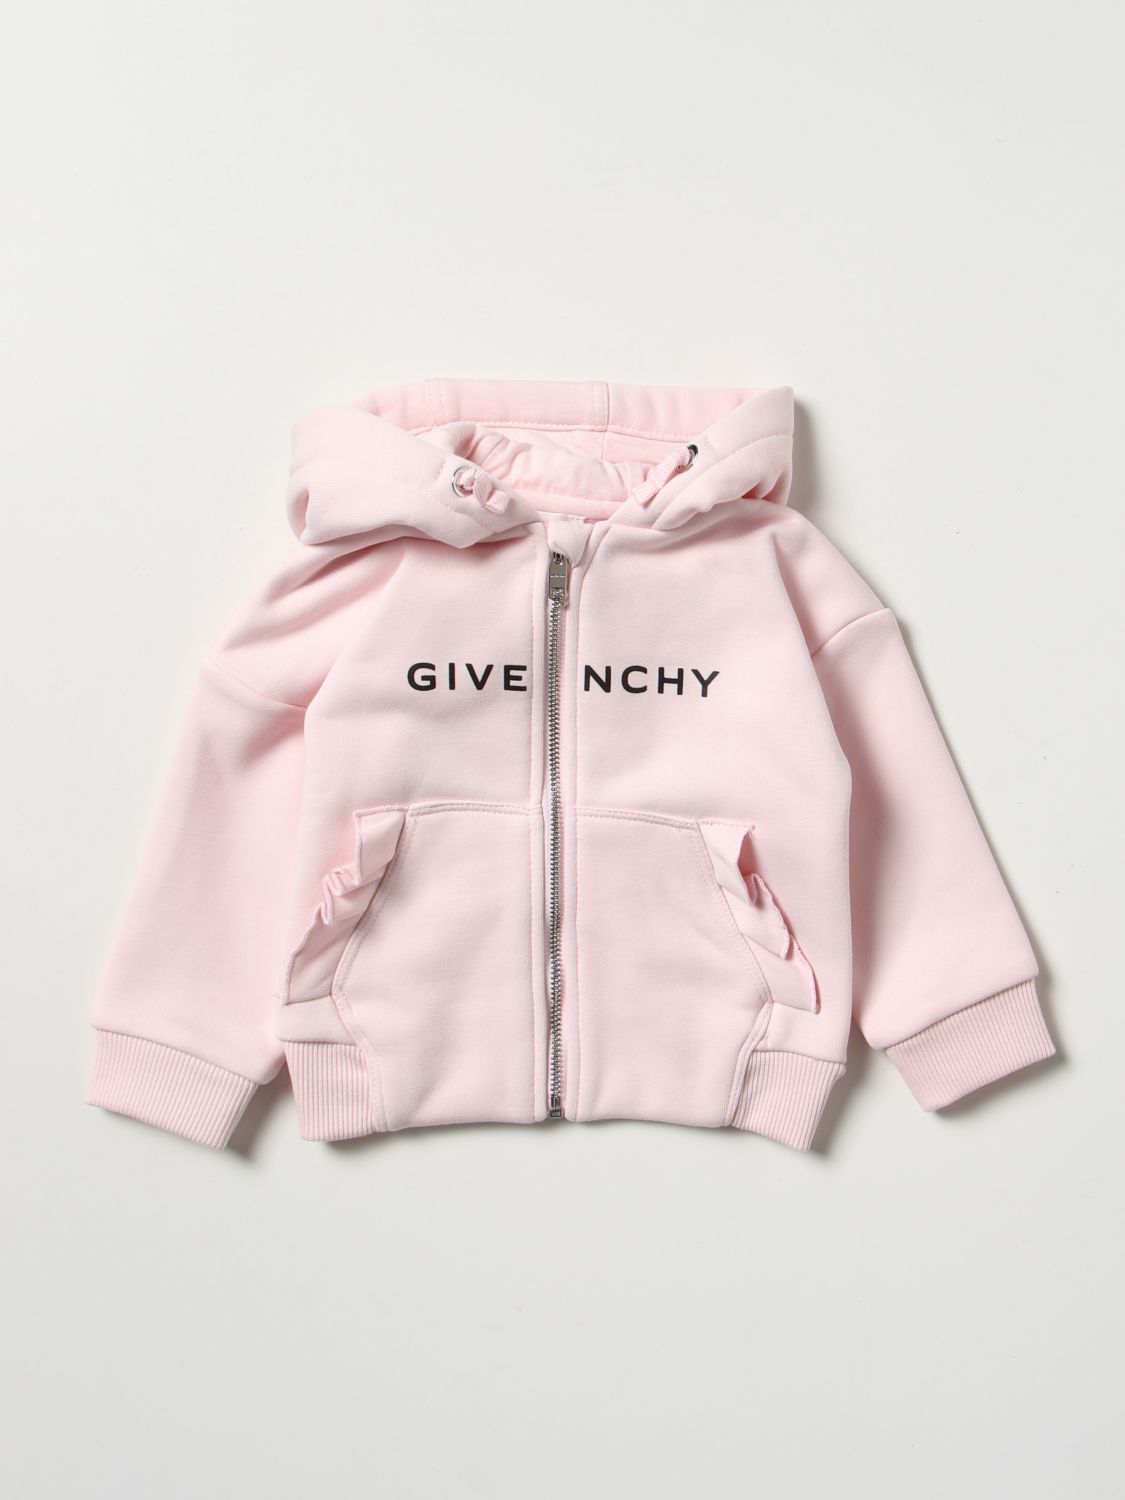 Givenchy Babies' Sweater Kids Color Pink | ModeSens